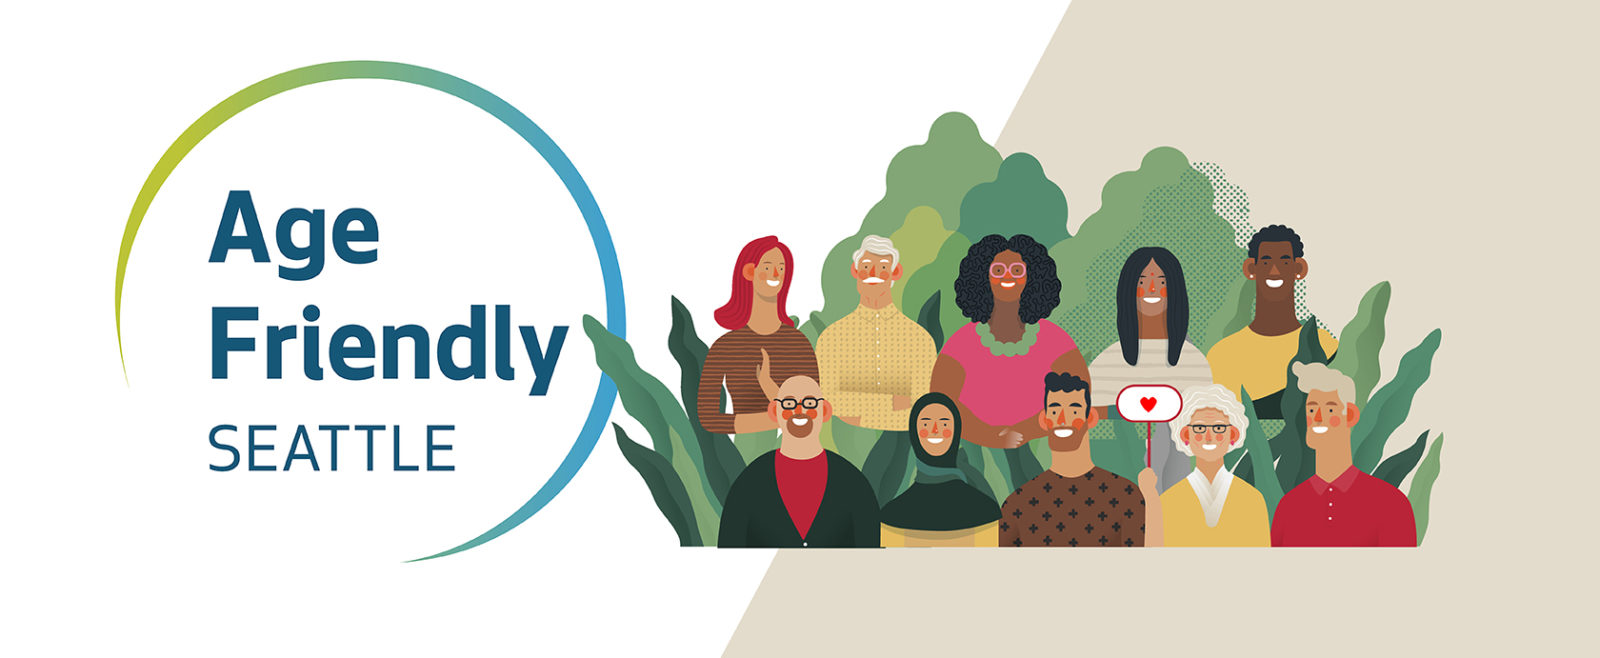 Age Friendly Seattle logo and graphic image of 10 diverse older adults